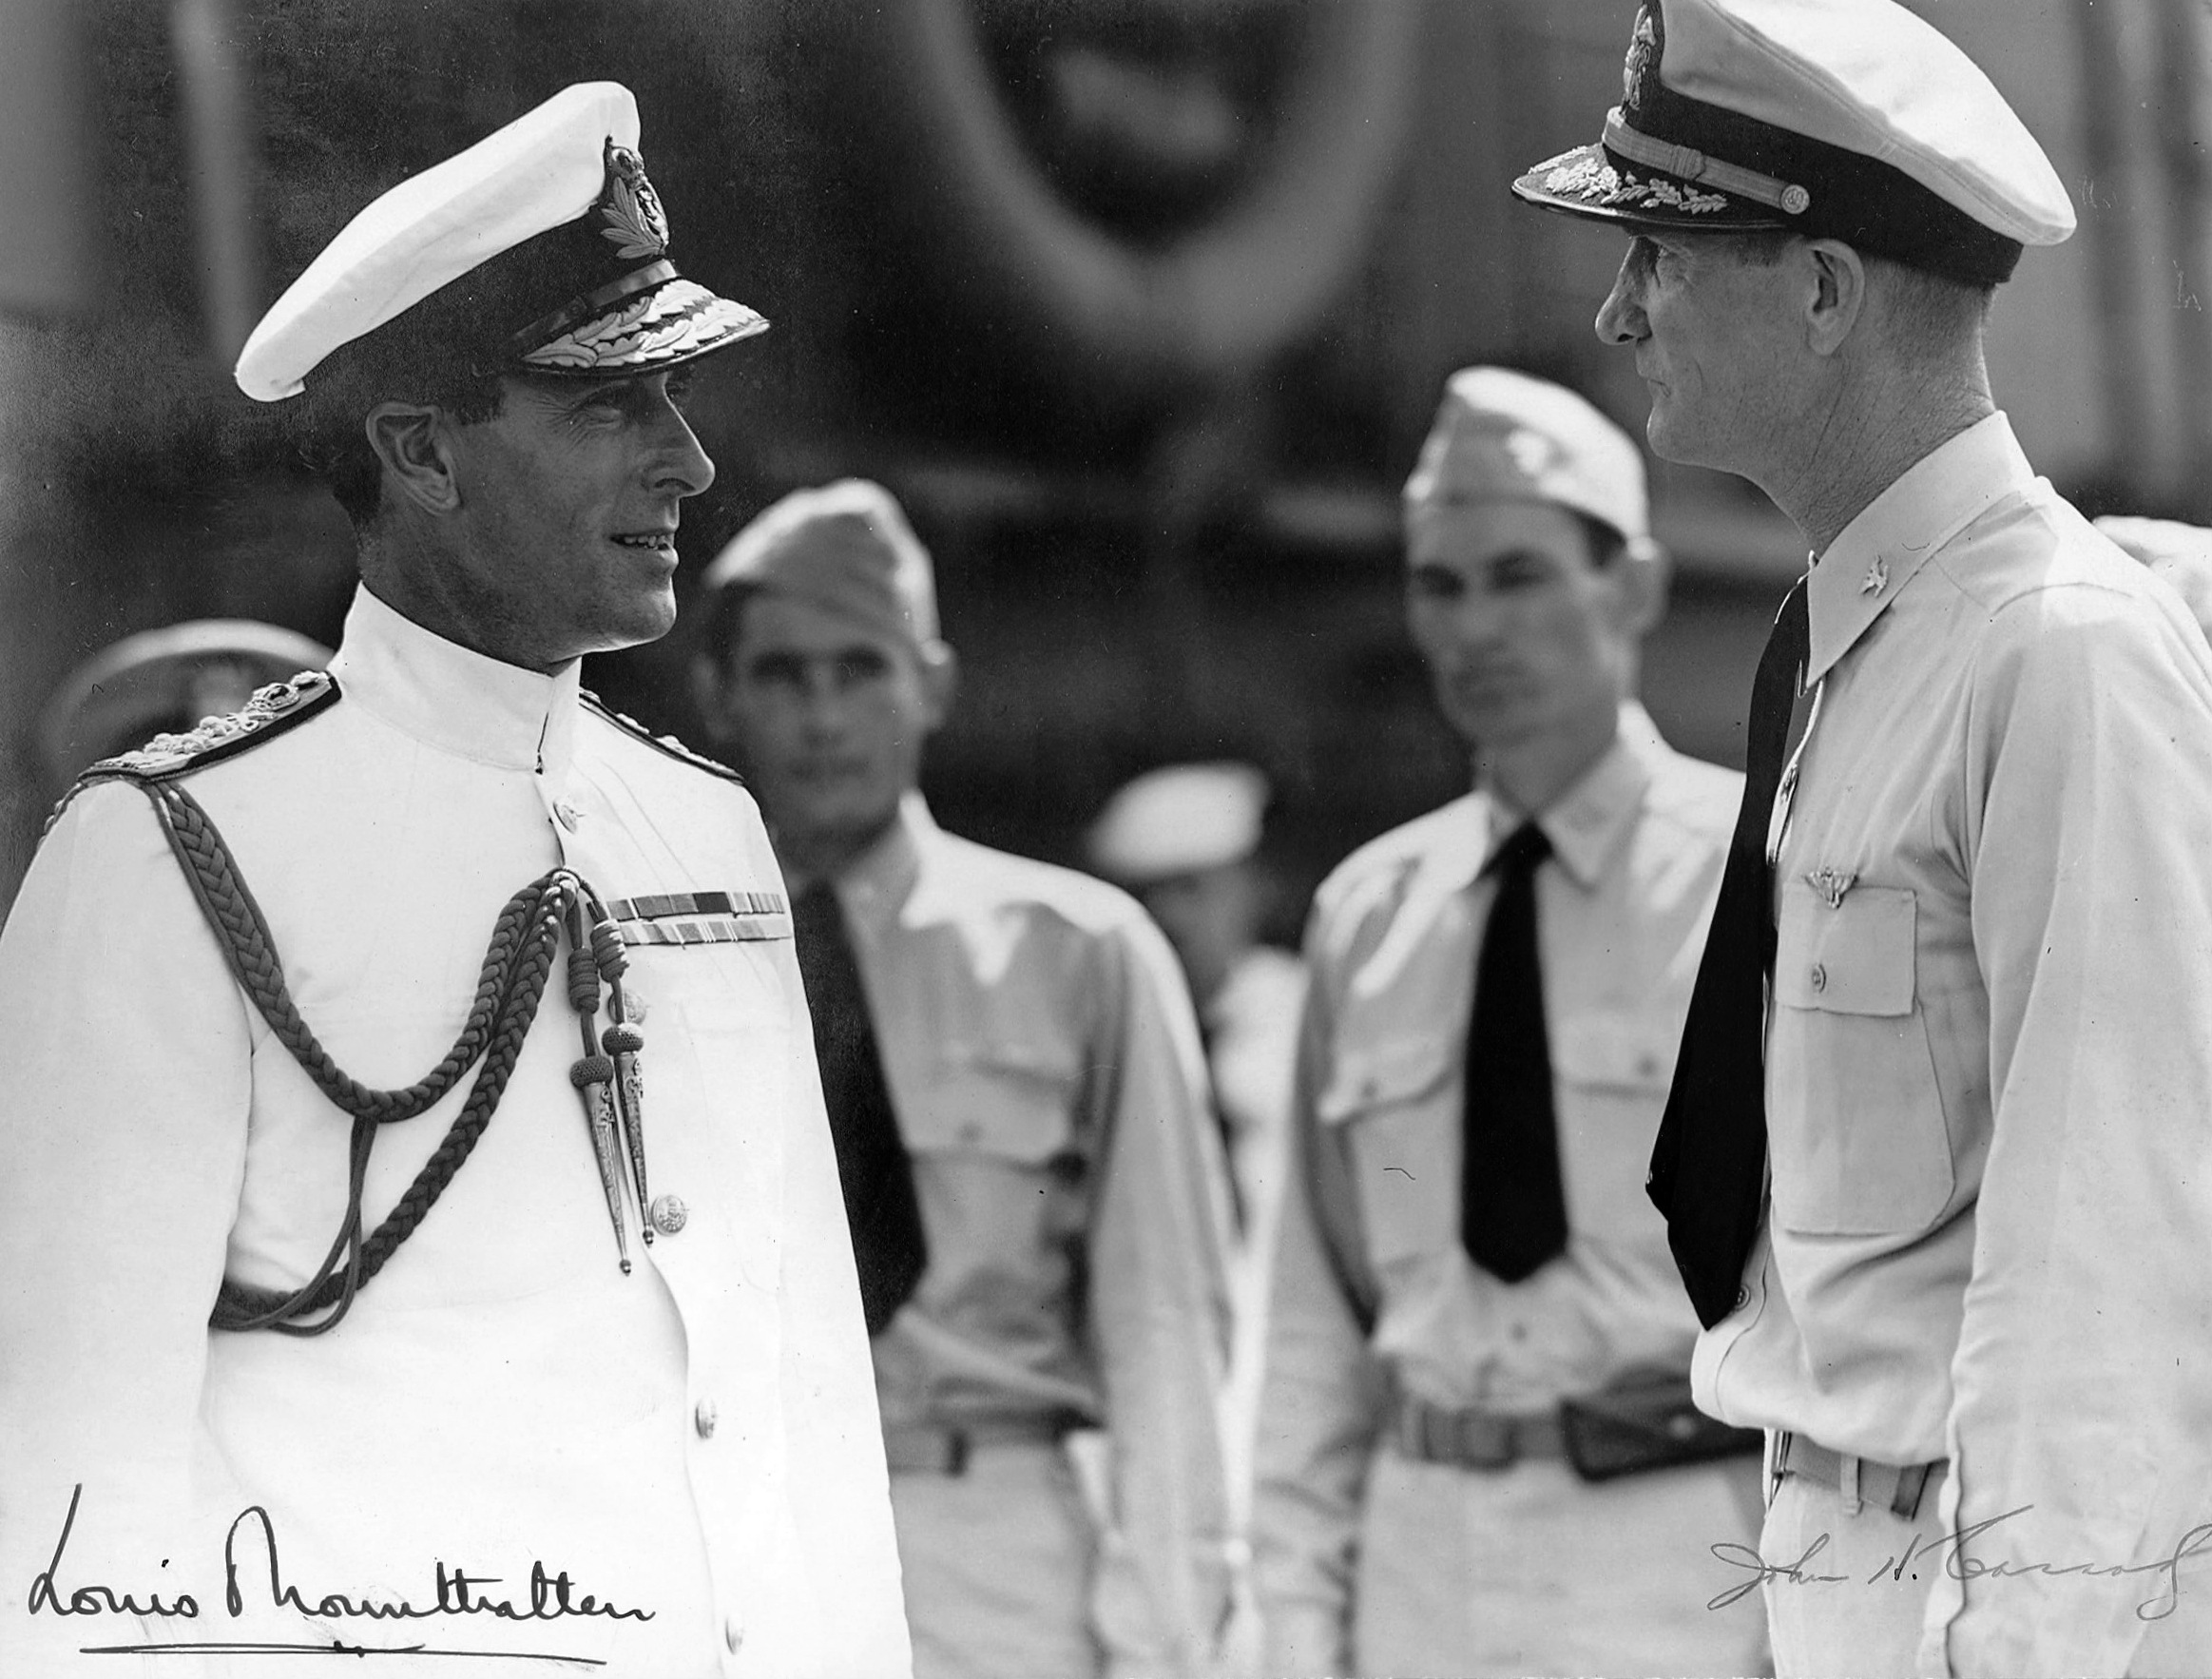 Supreme Allied Commander of the Southeast Asia Command, Admiral Louis Mountbatten being greeted aboard USS Saratoga by Captain John Cassady at Colombo, Ceylon (now Sri Lanka), 30 Apr 1944.